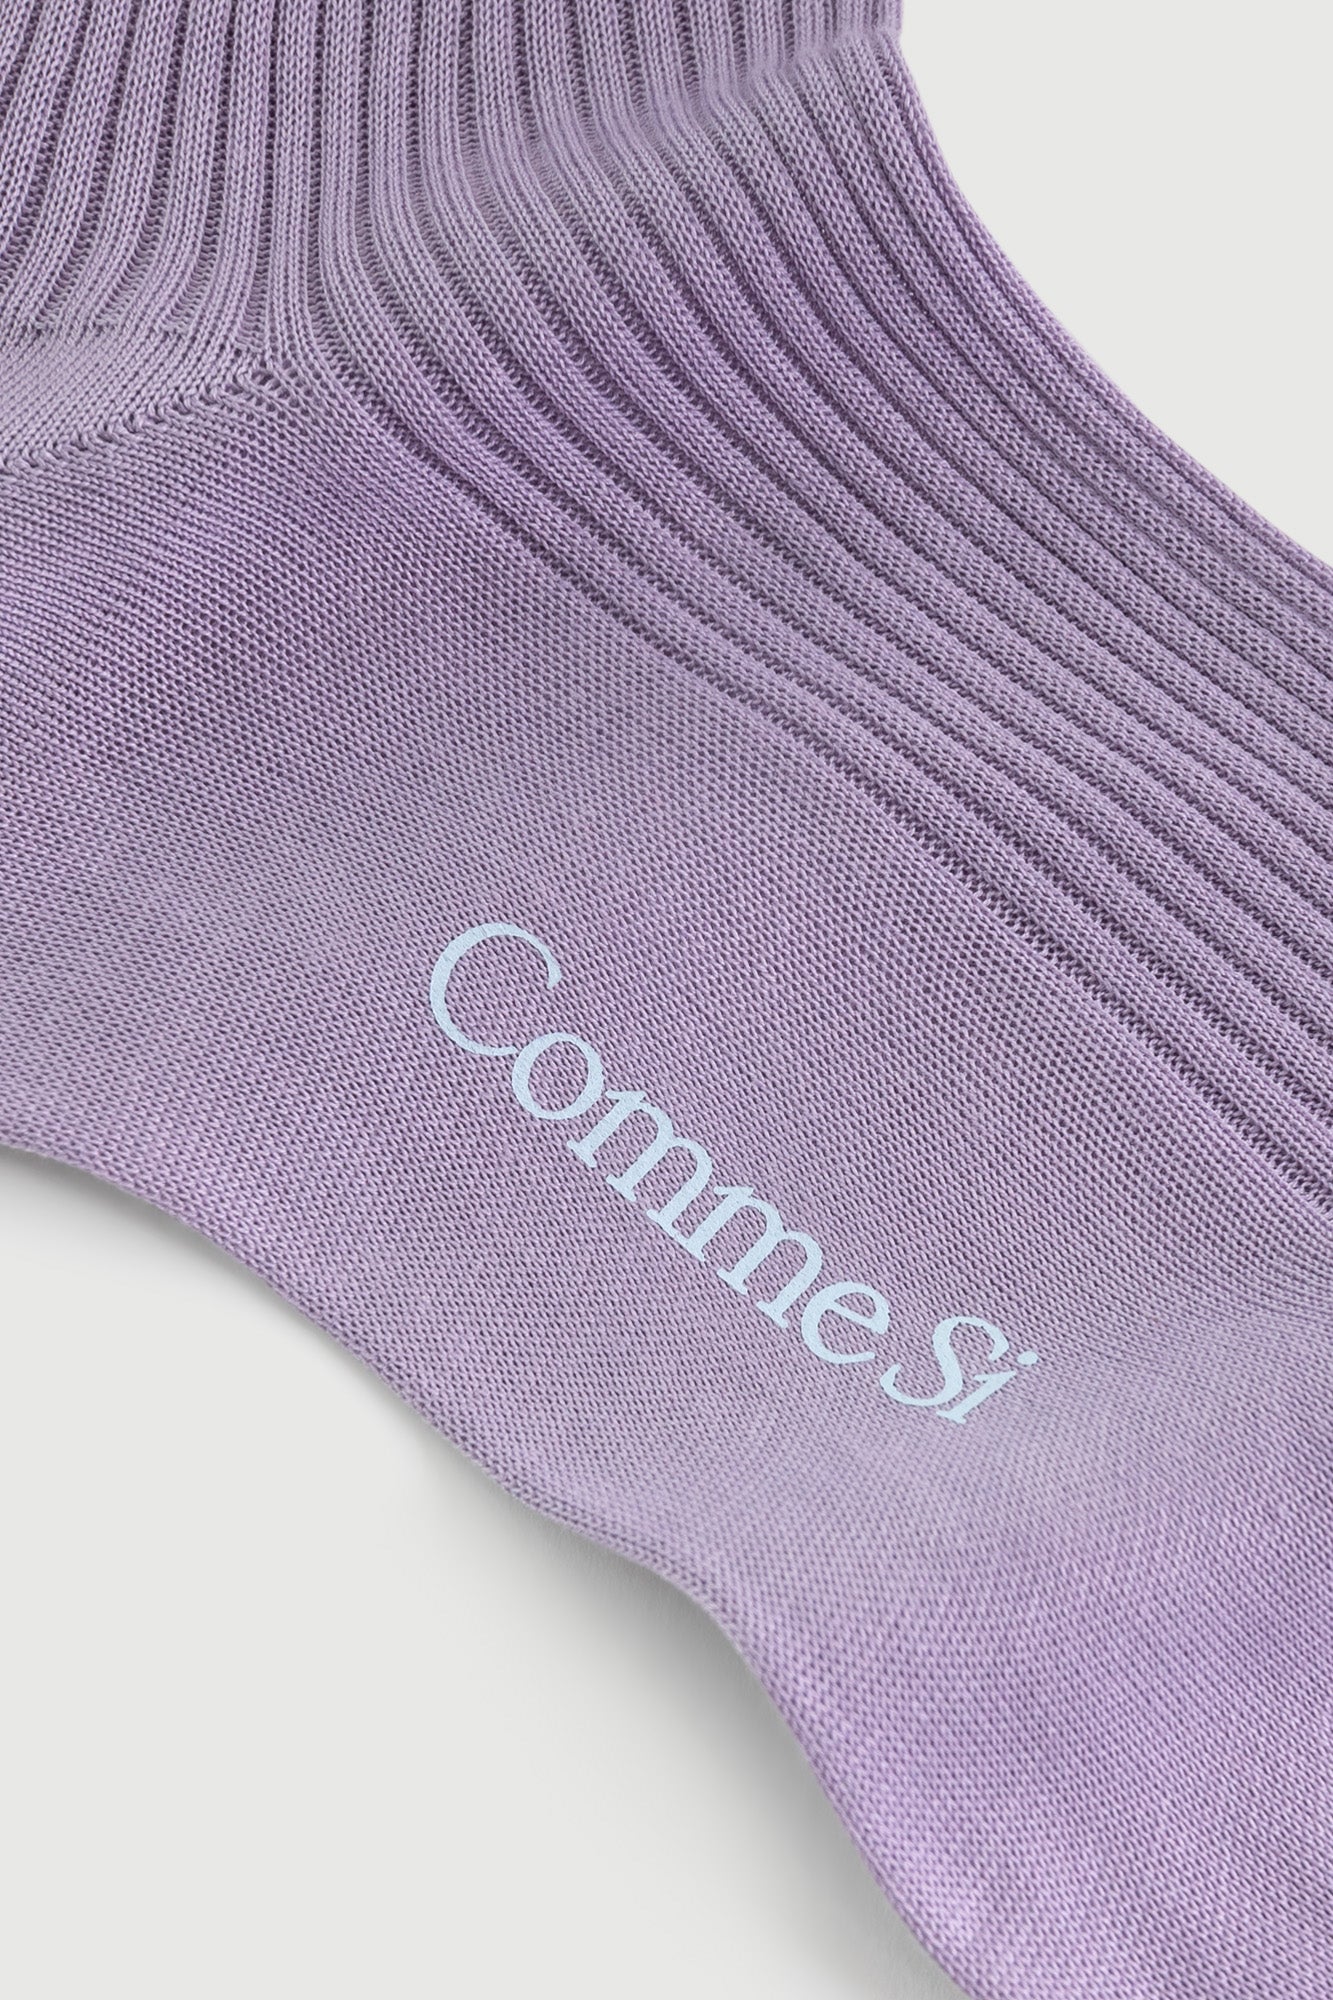 footbed detail, The Agnelli Sock in Lilac, Egyptian Cotton